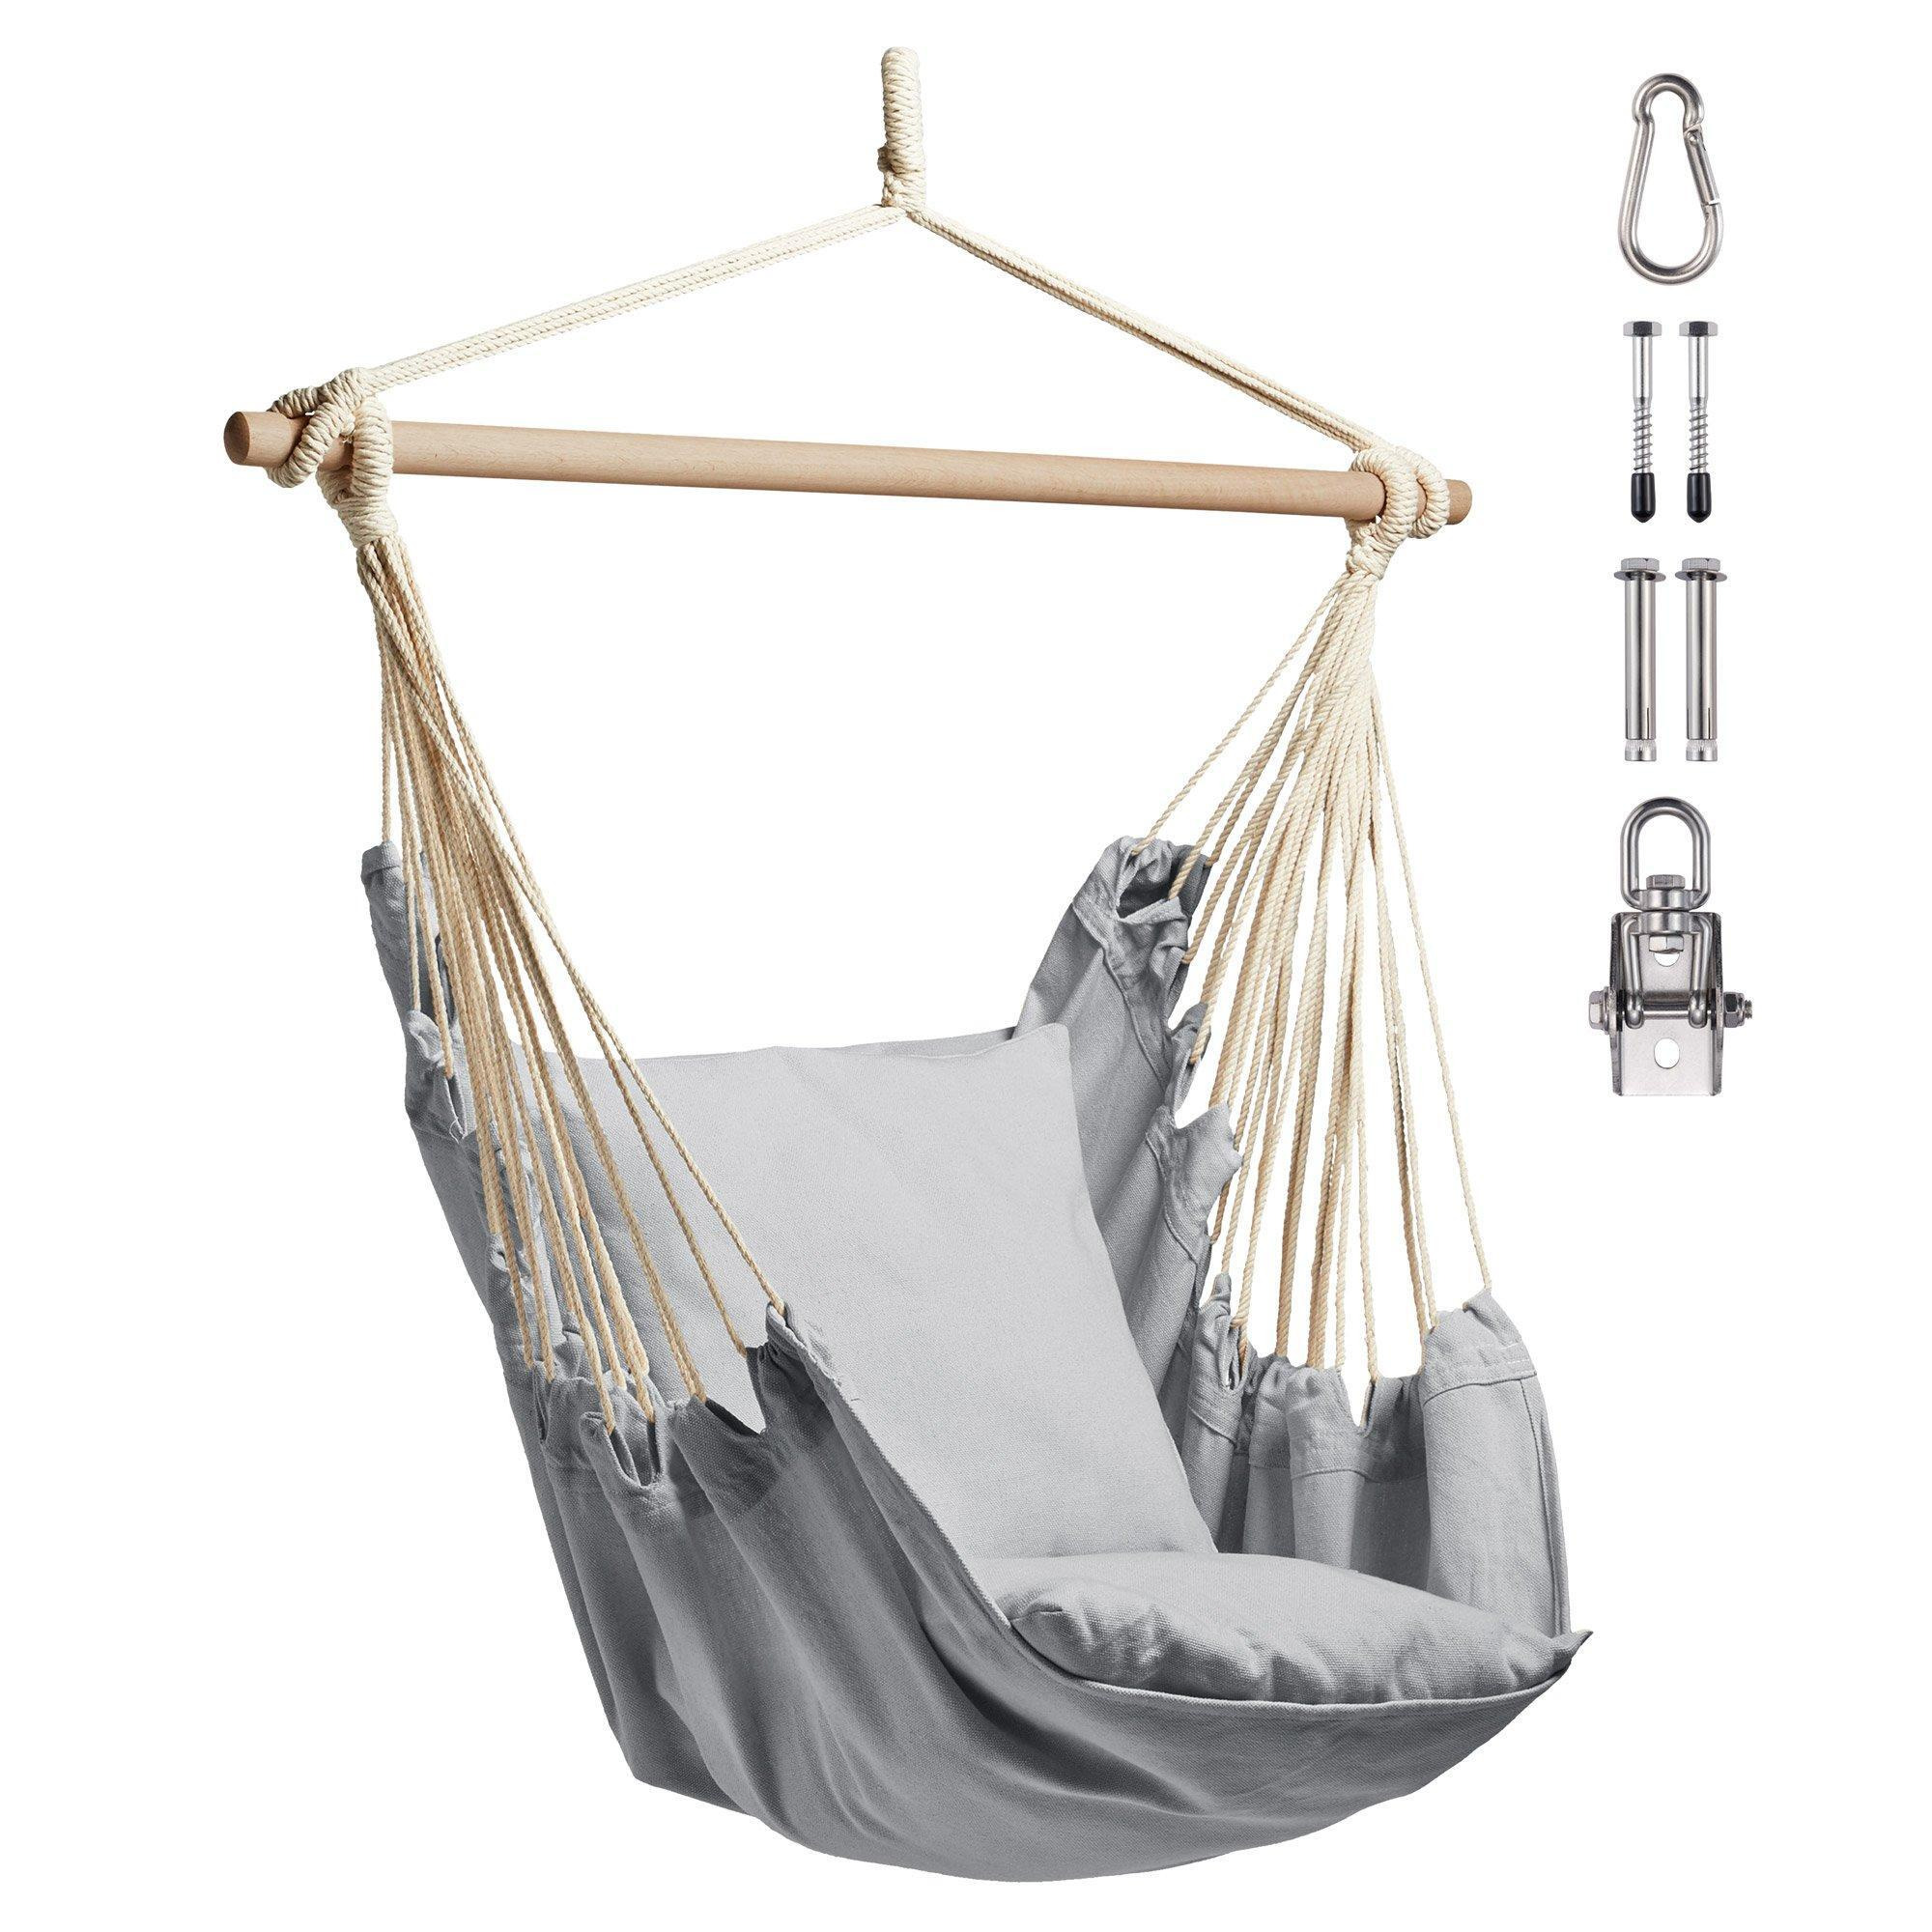 Outdoor Garden Hanging Chair with Attachments - image 1